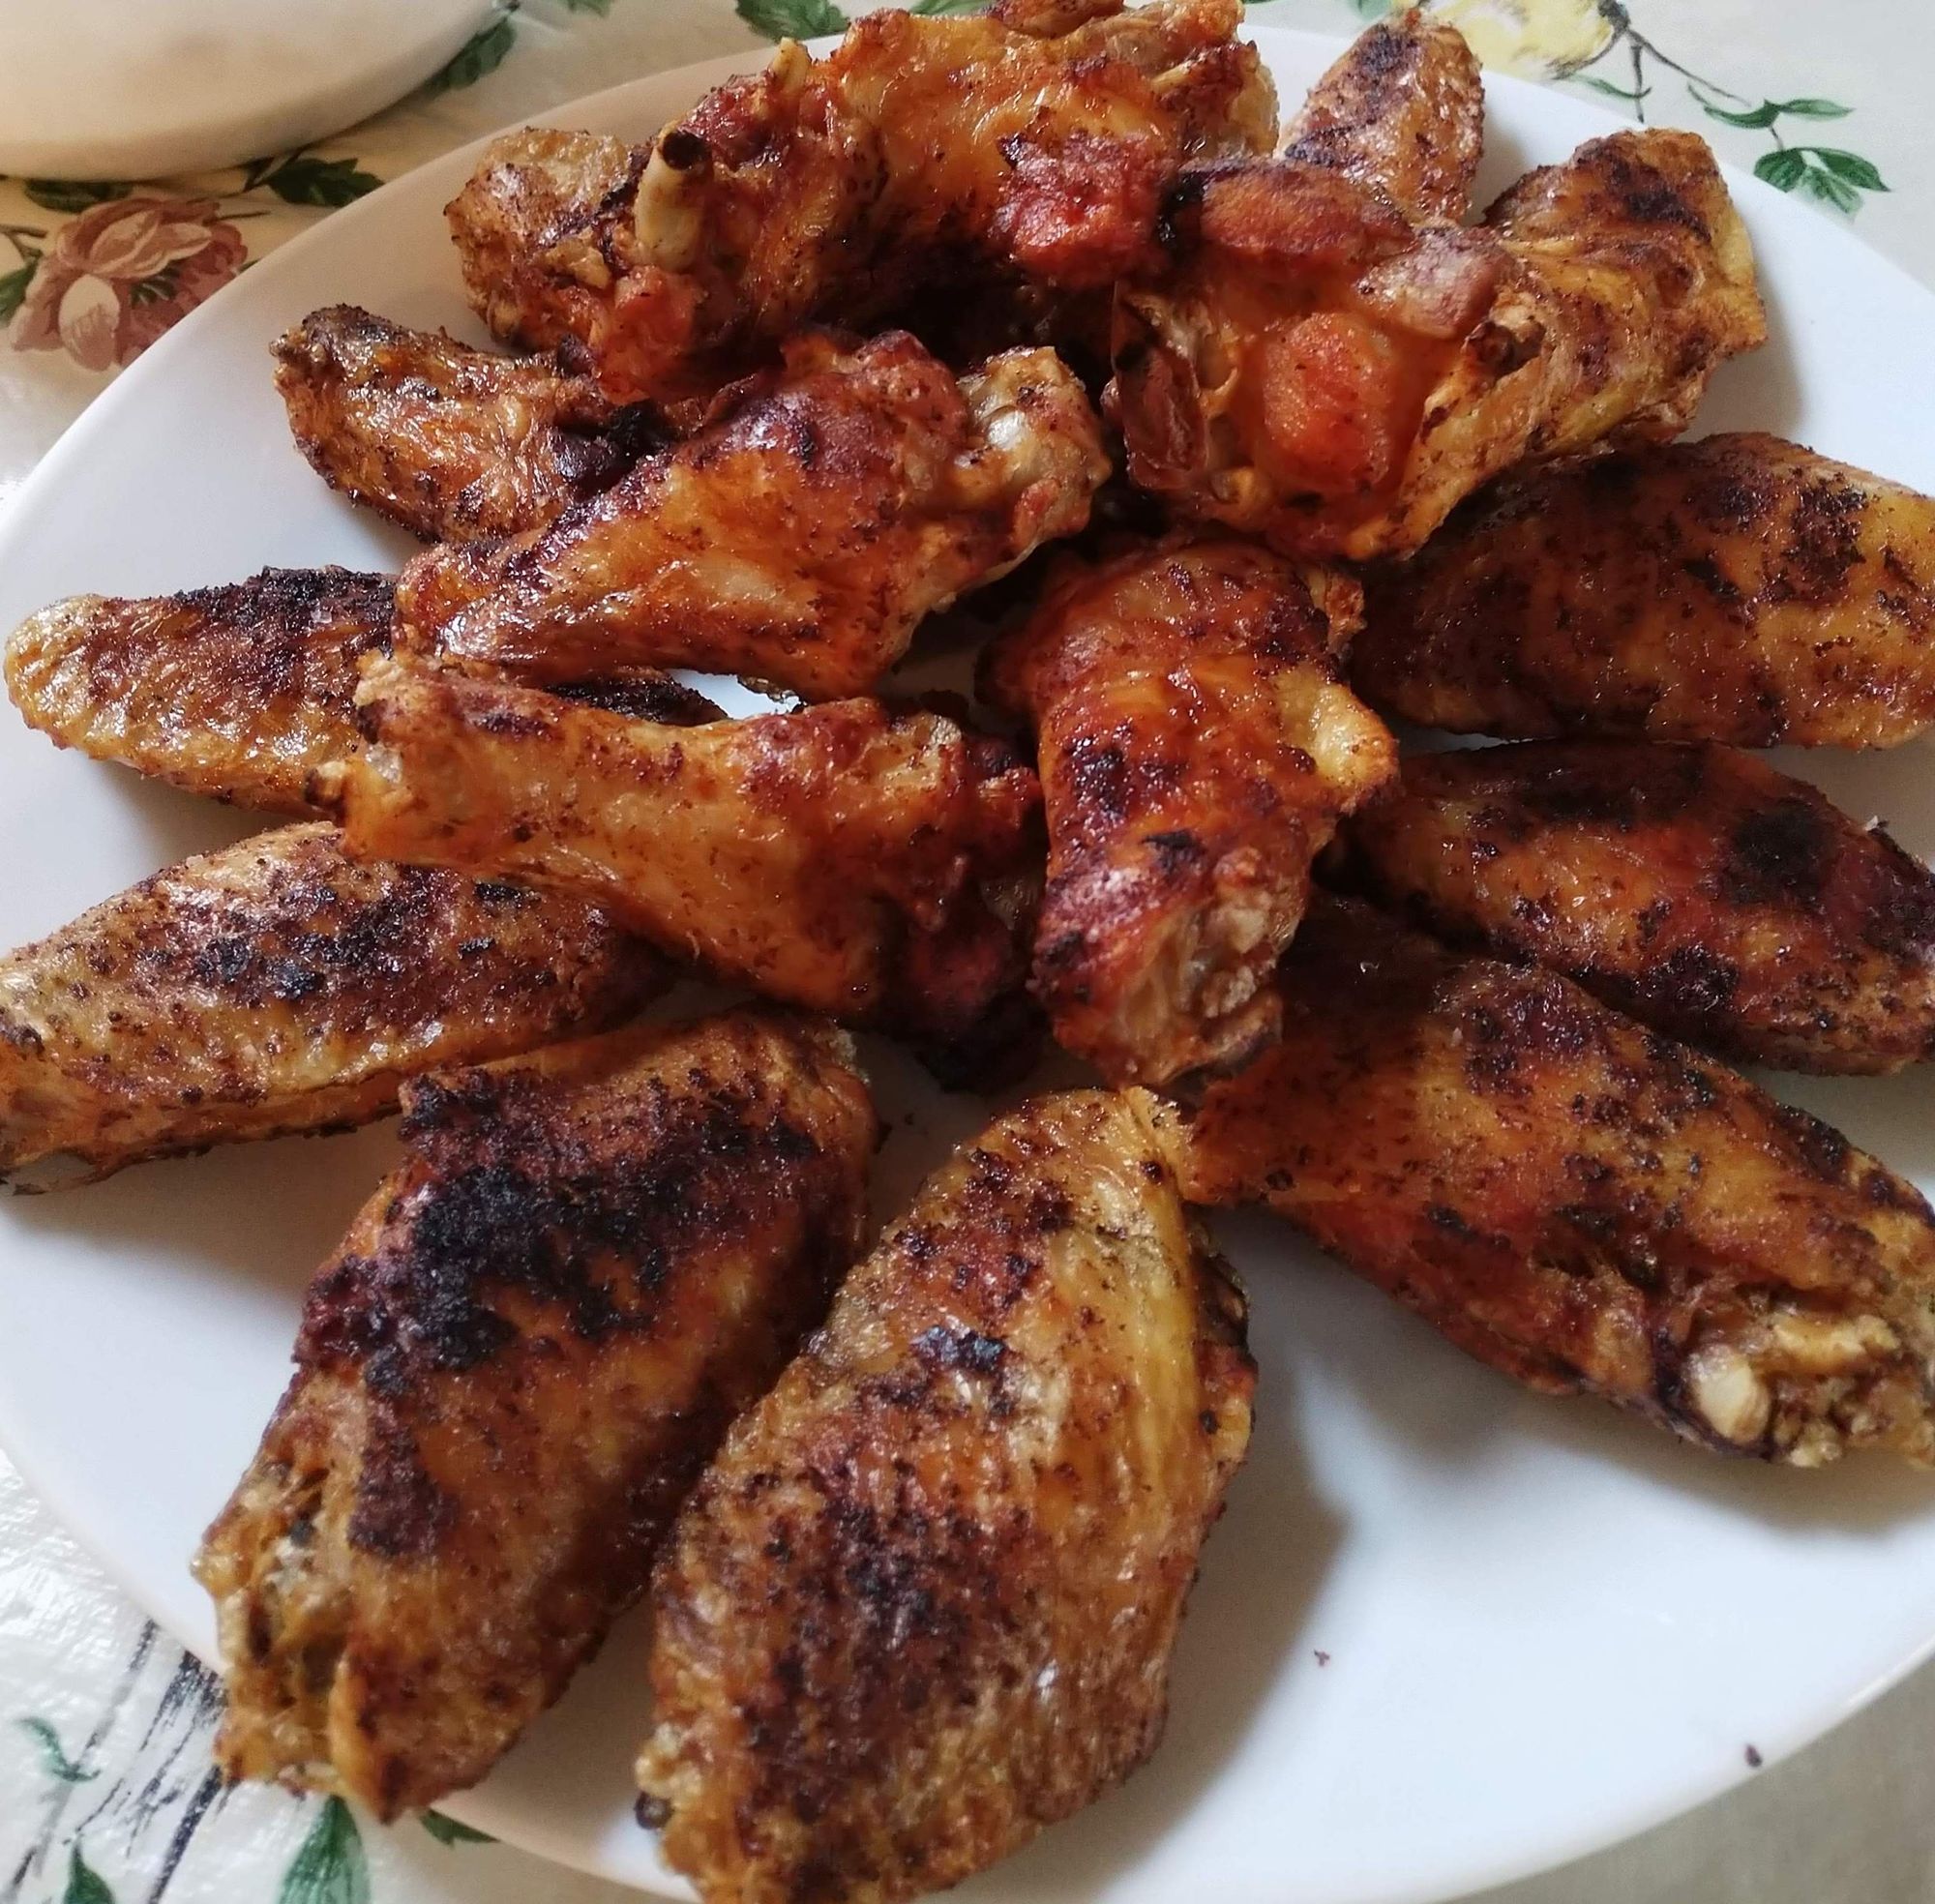 image from Smoked wings